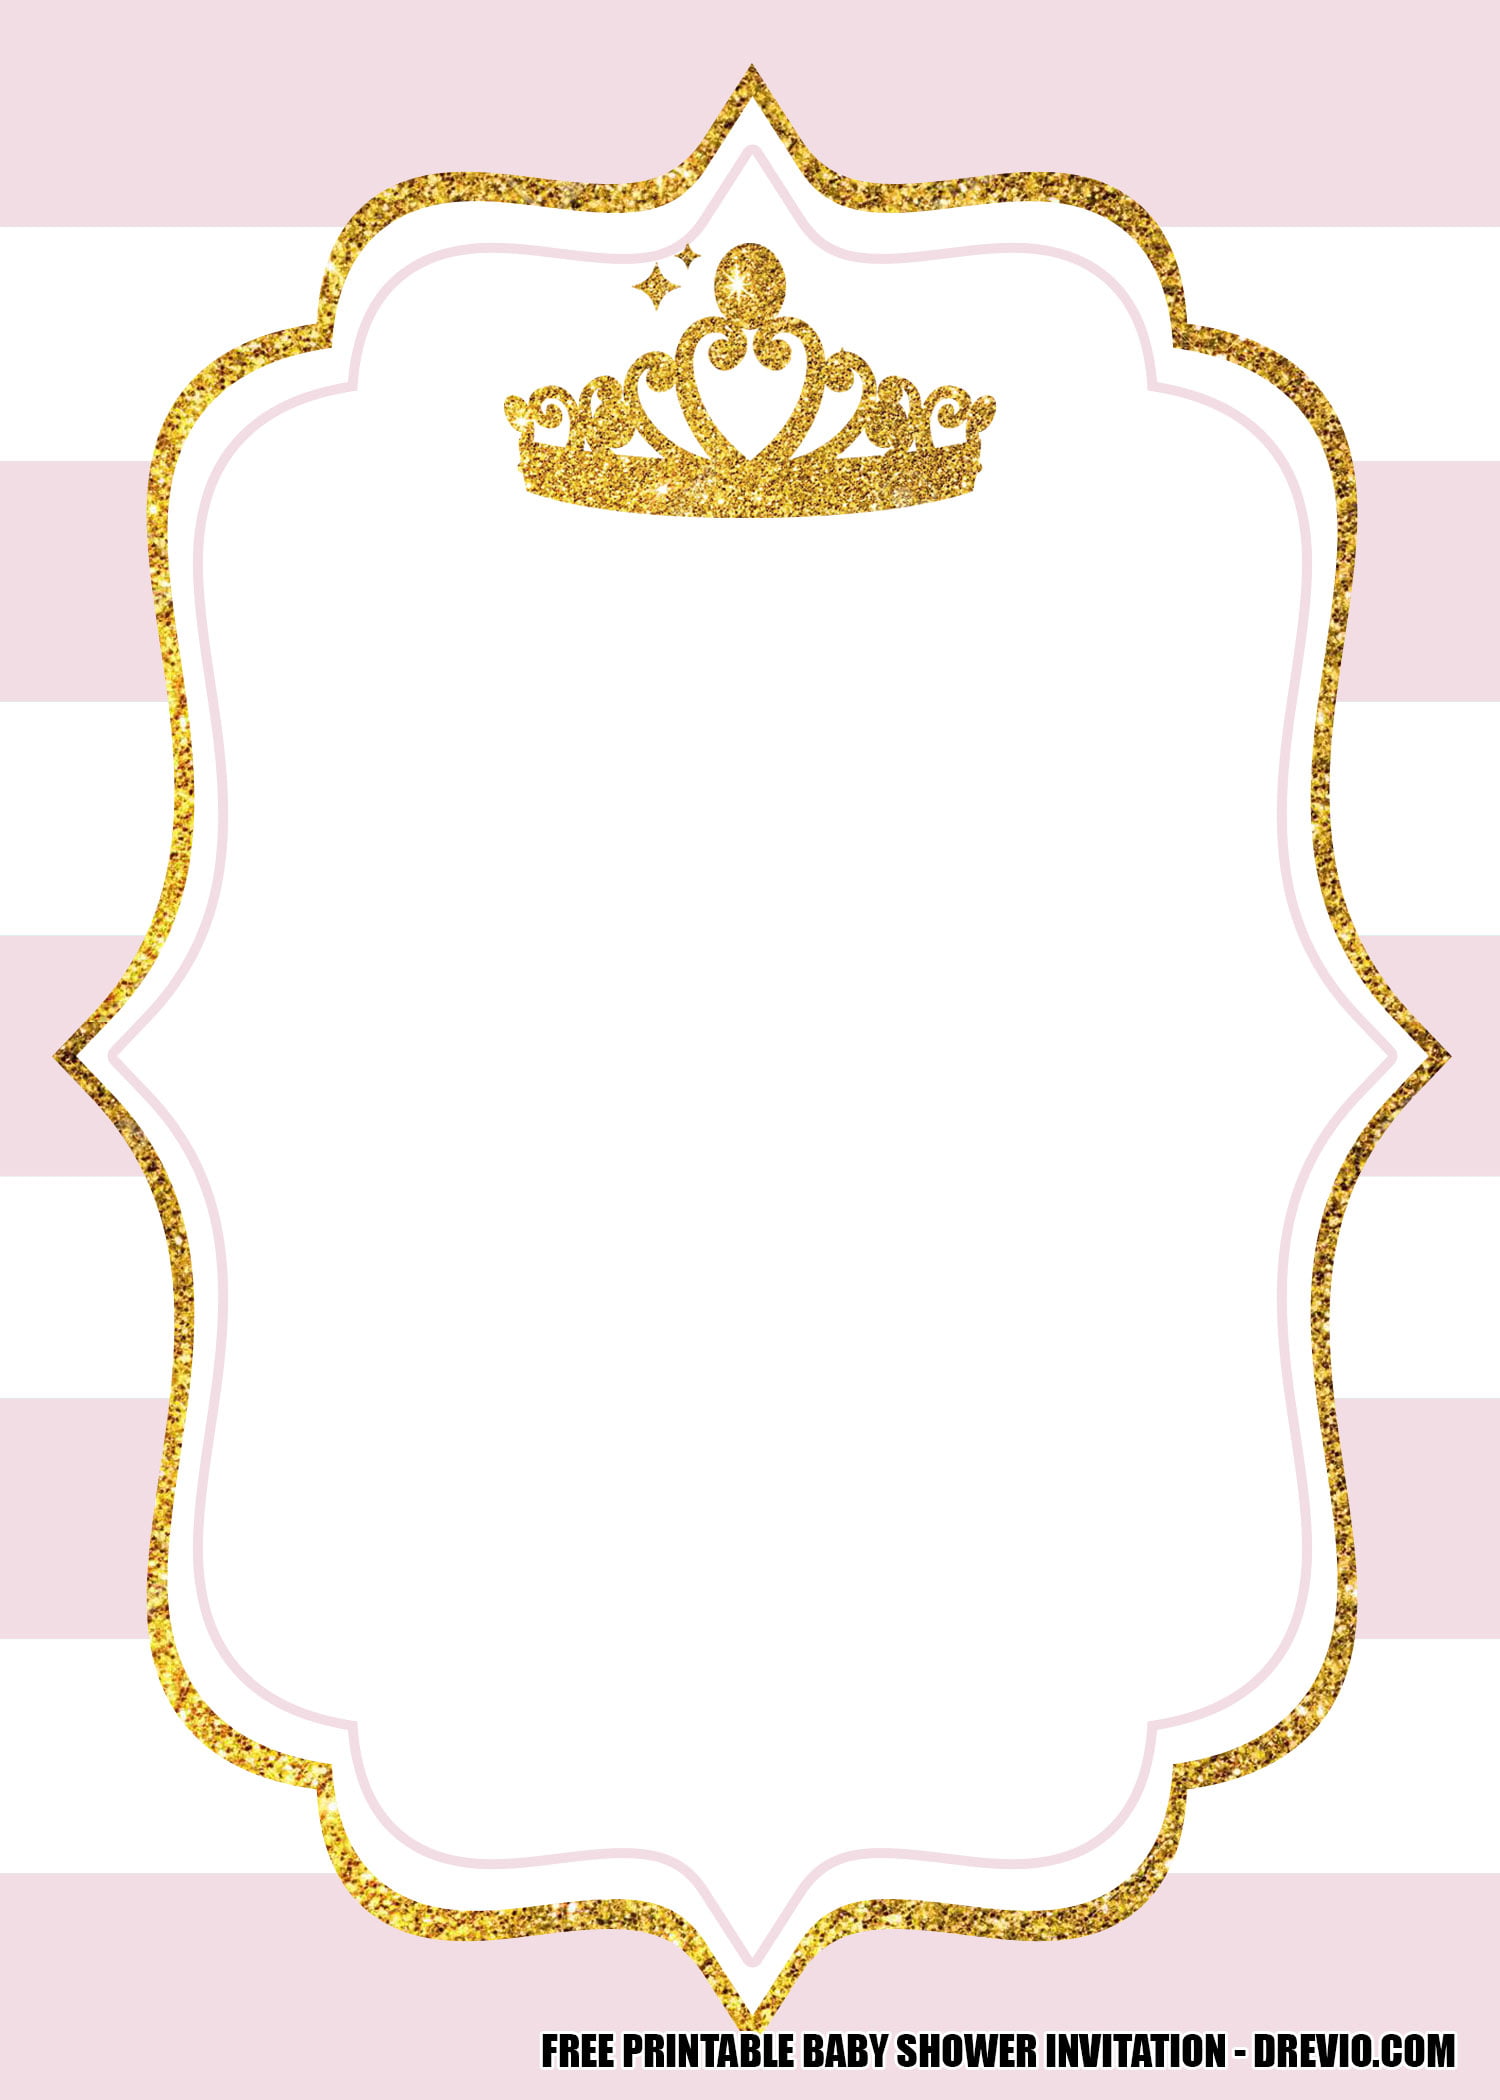 13-free-pink-and-gold-princess-crown-themed-invitation-templates